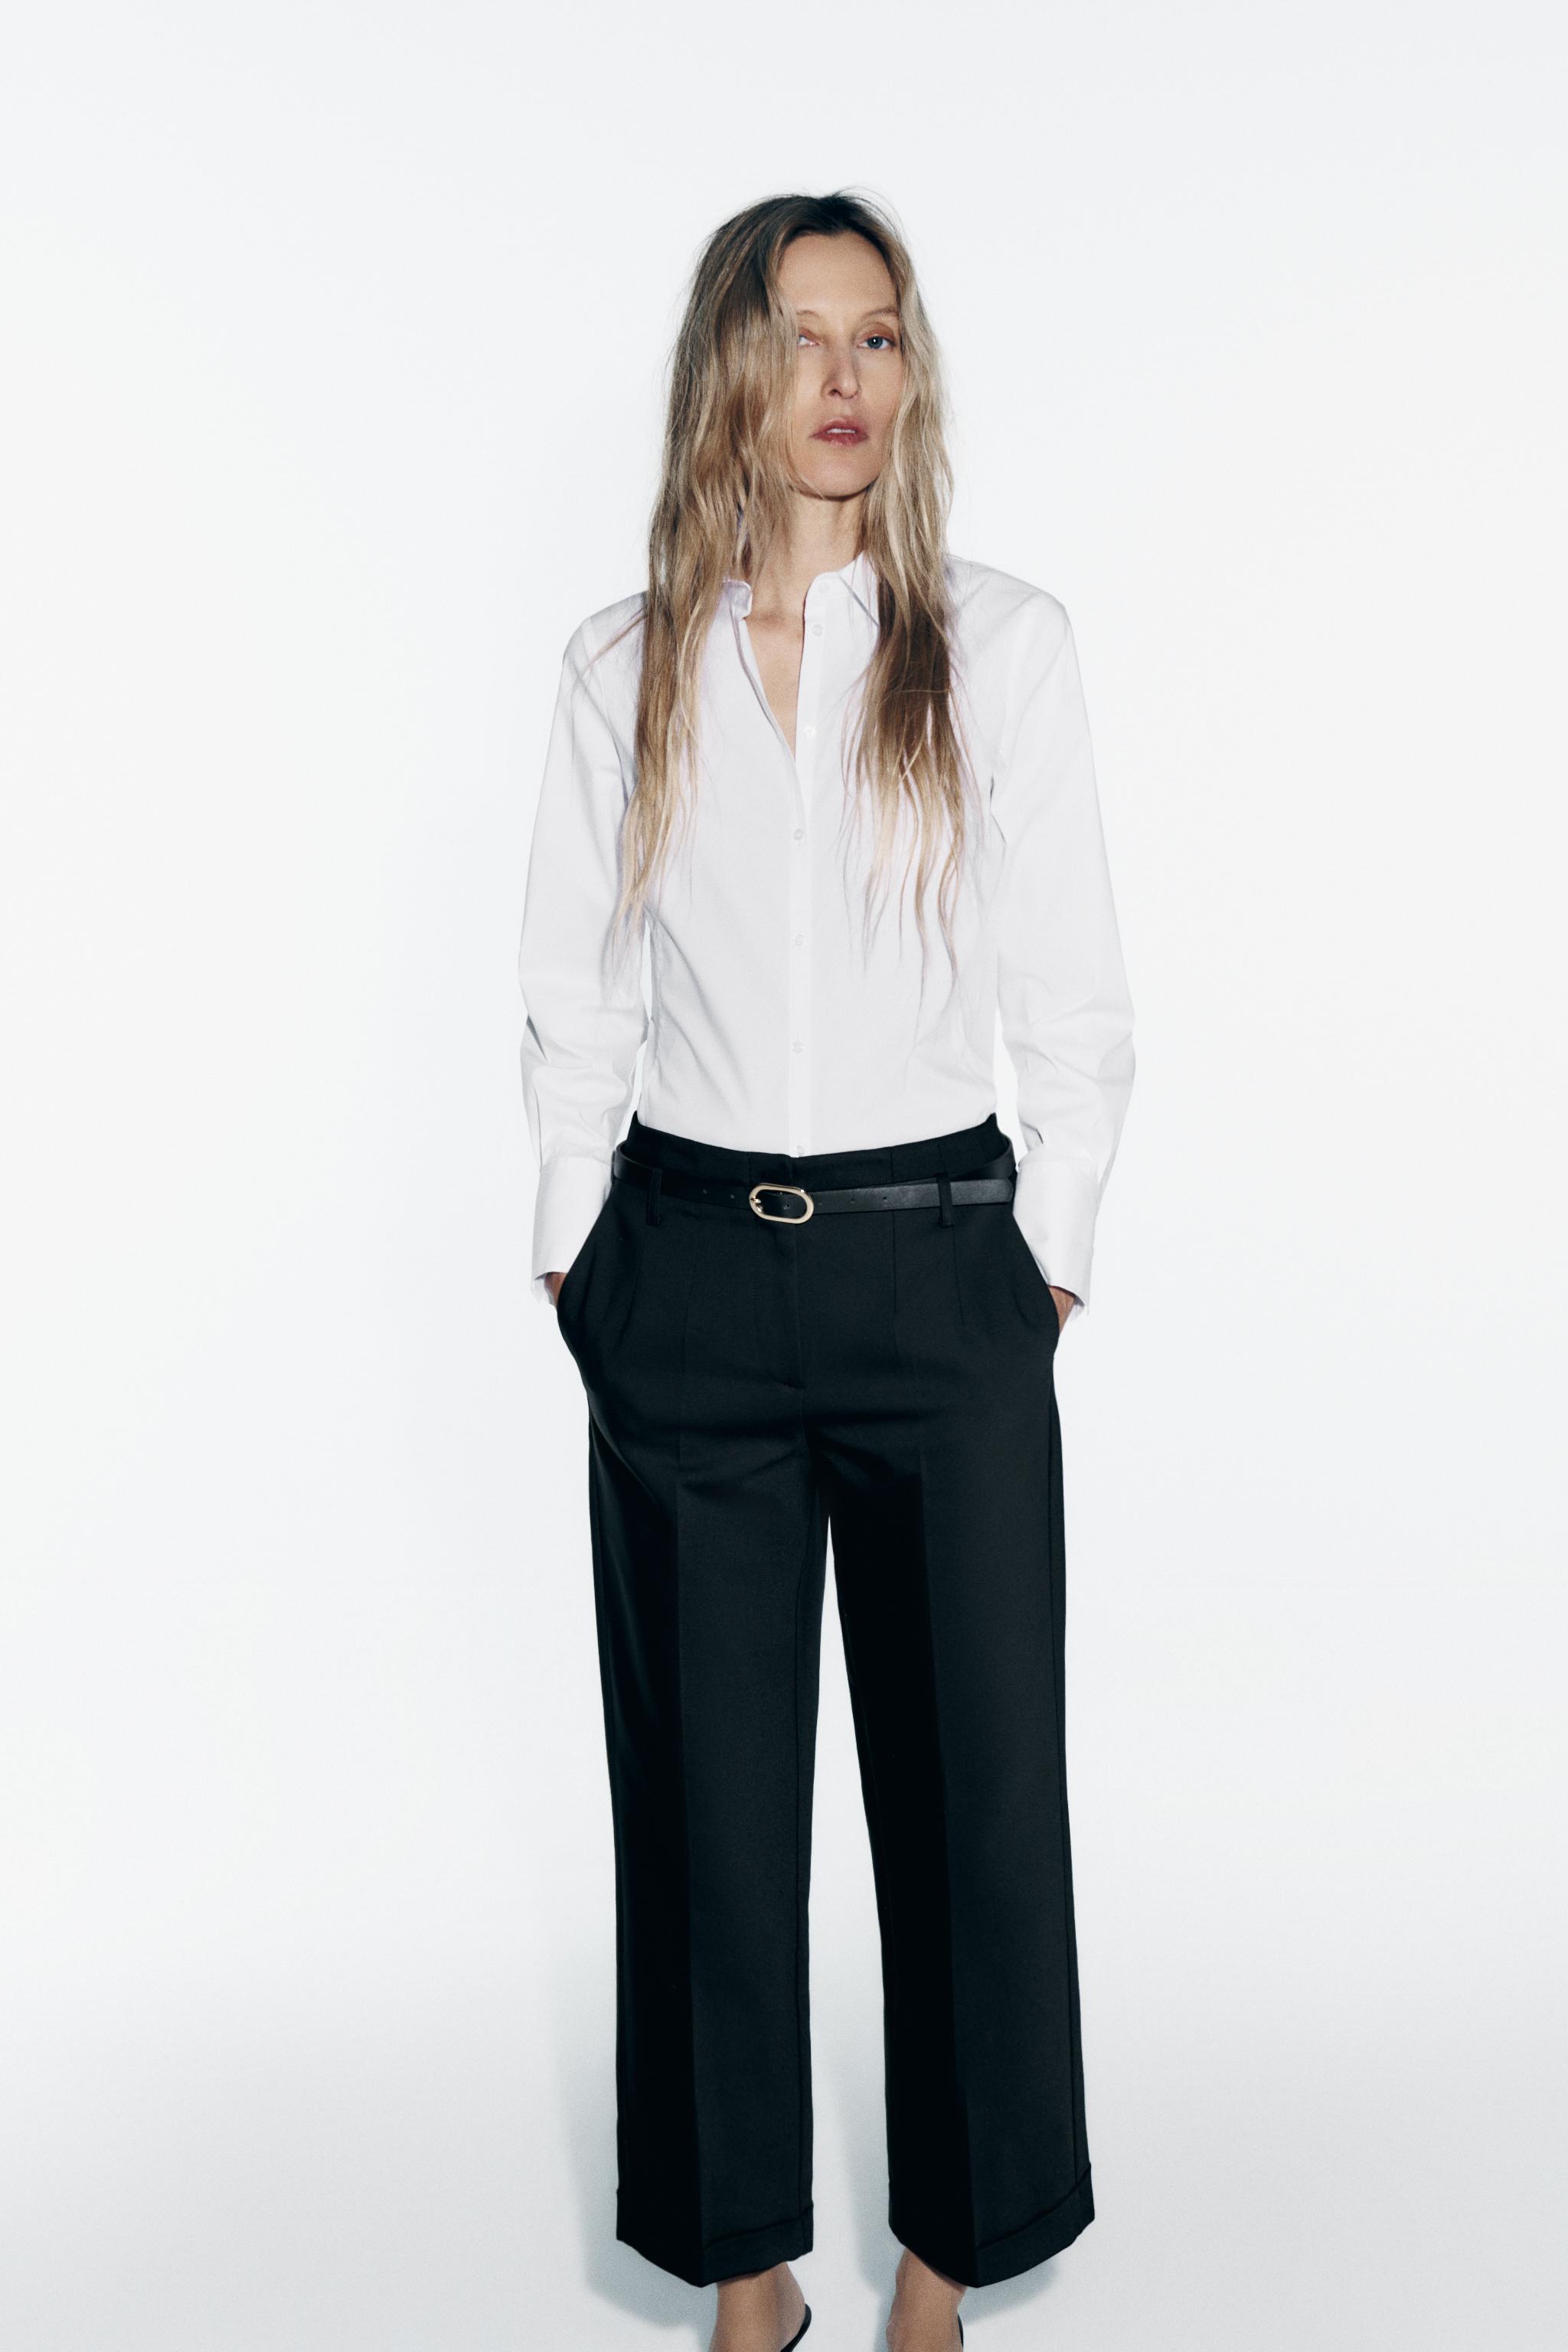 NWT Zara Button High-Waisted Pants. Oyster White color. Tapered. Cuffed